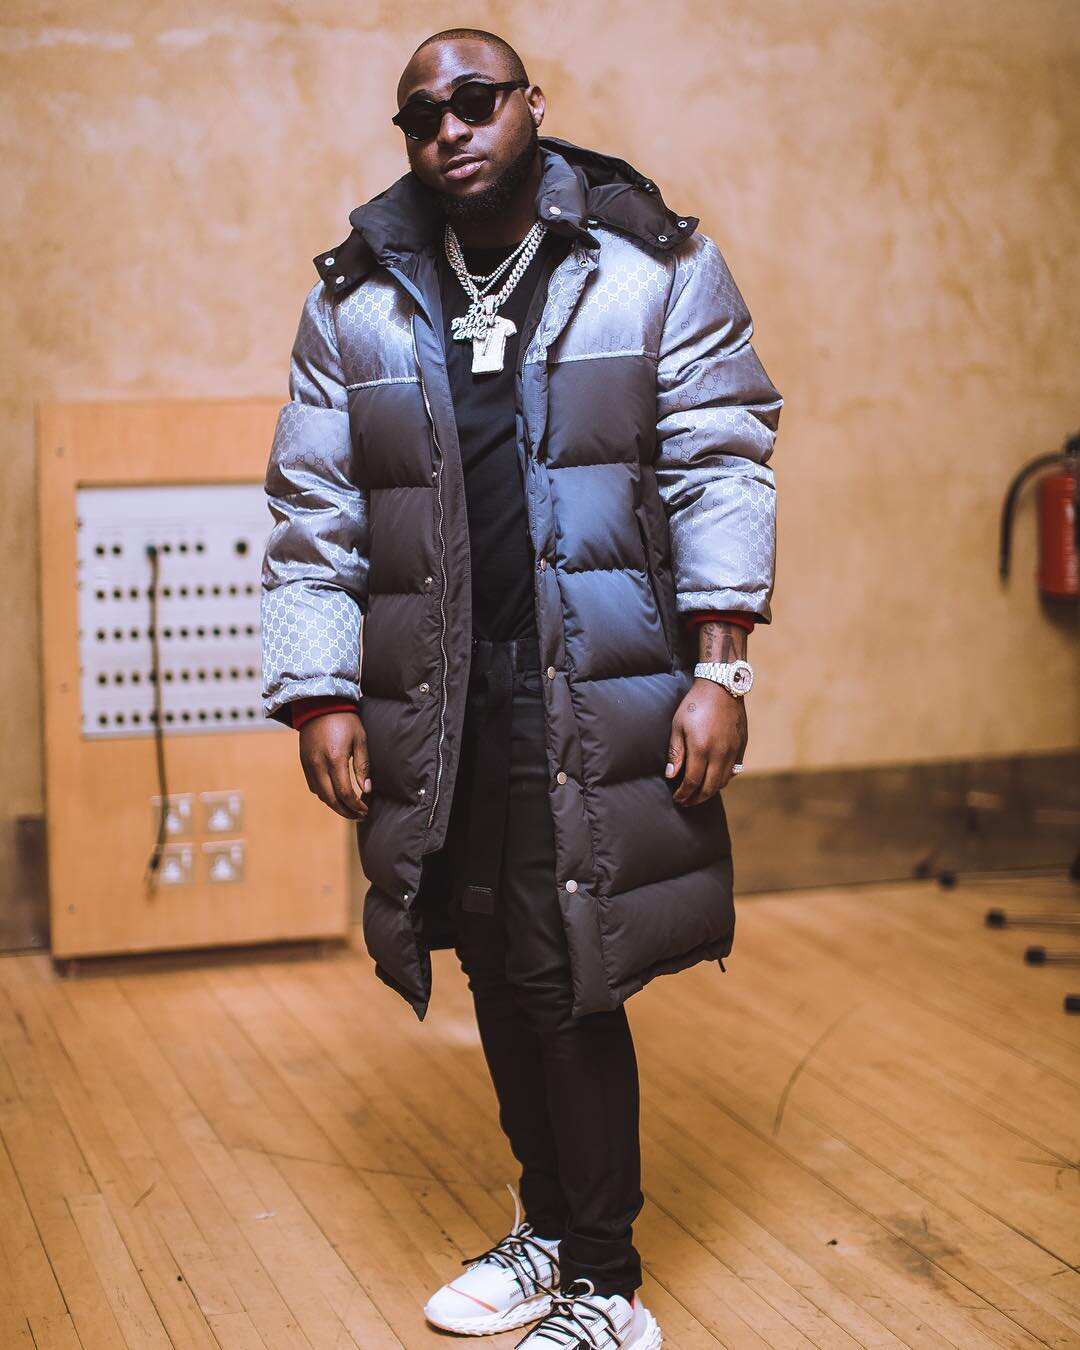 I cost a lot, period! - Davido says as he steps out looking stylish